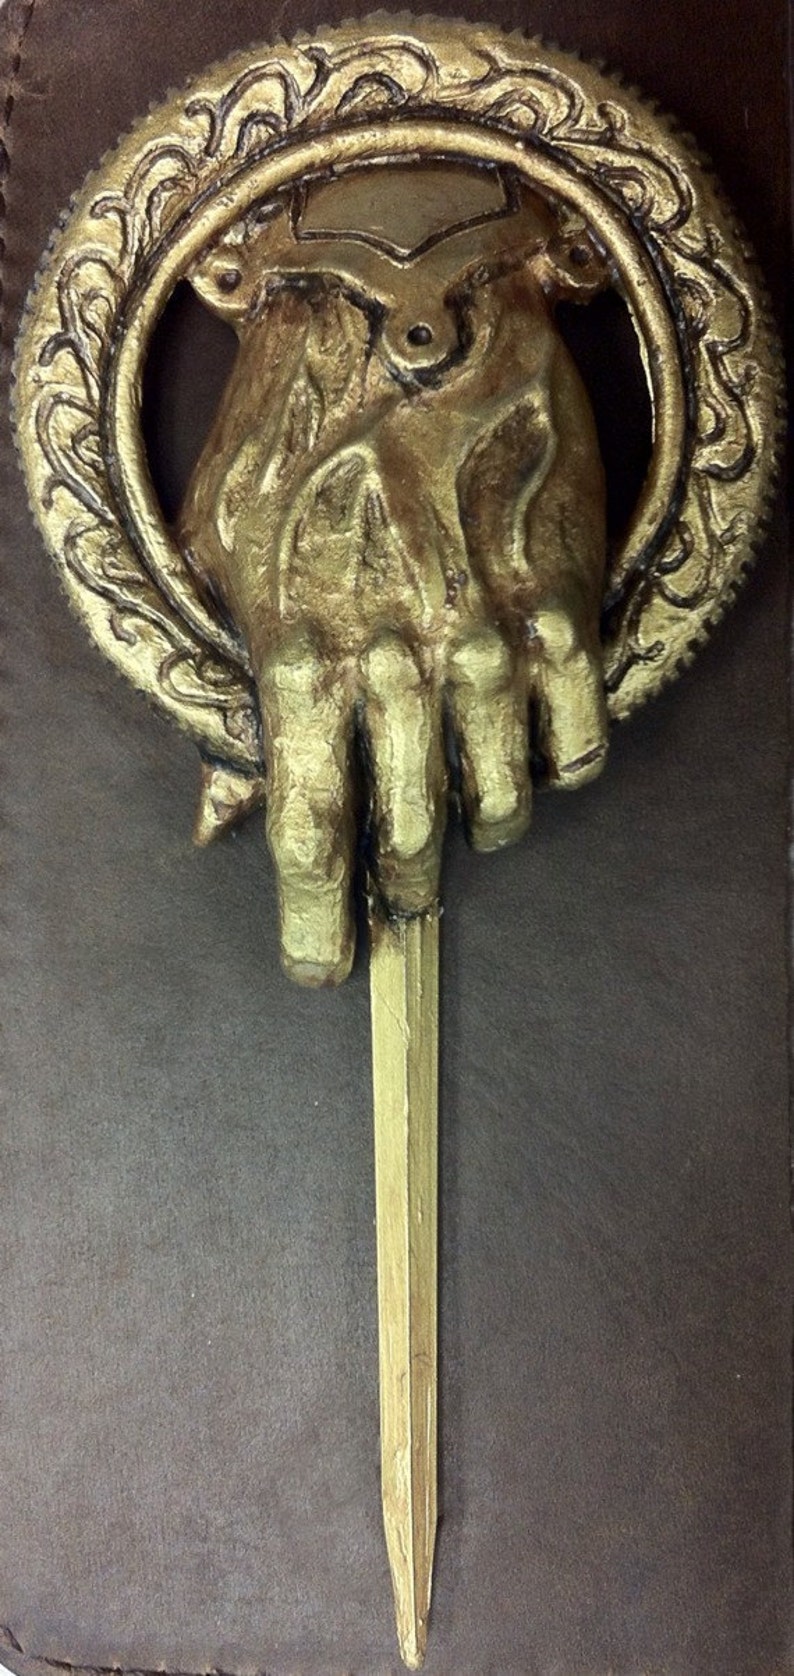 Game of Thrones Inspired Hand of the King 1:1 Prop Replica image 1